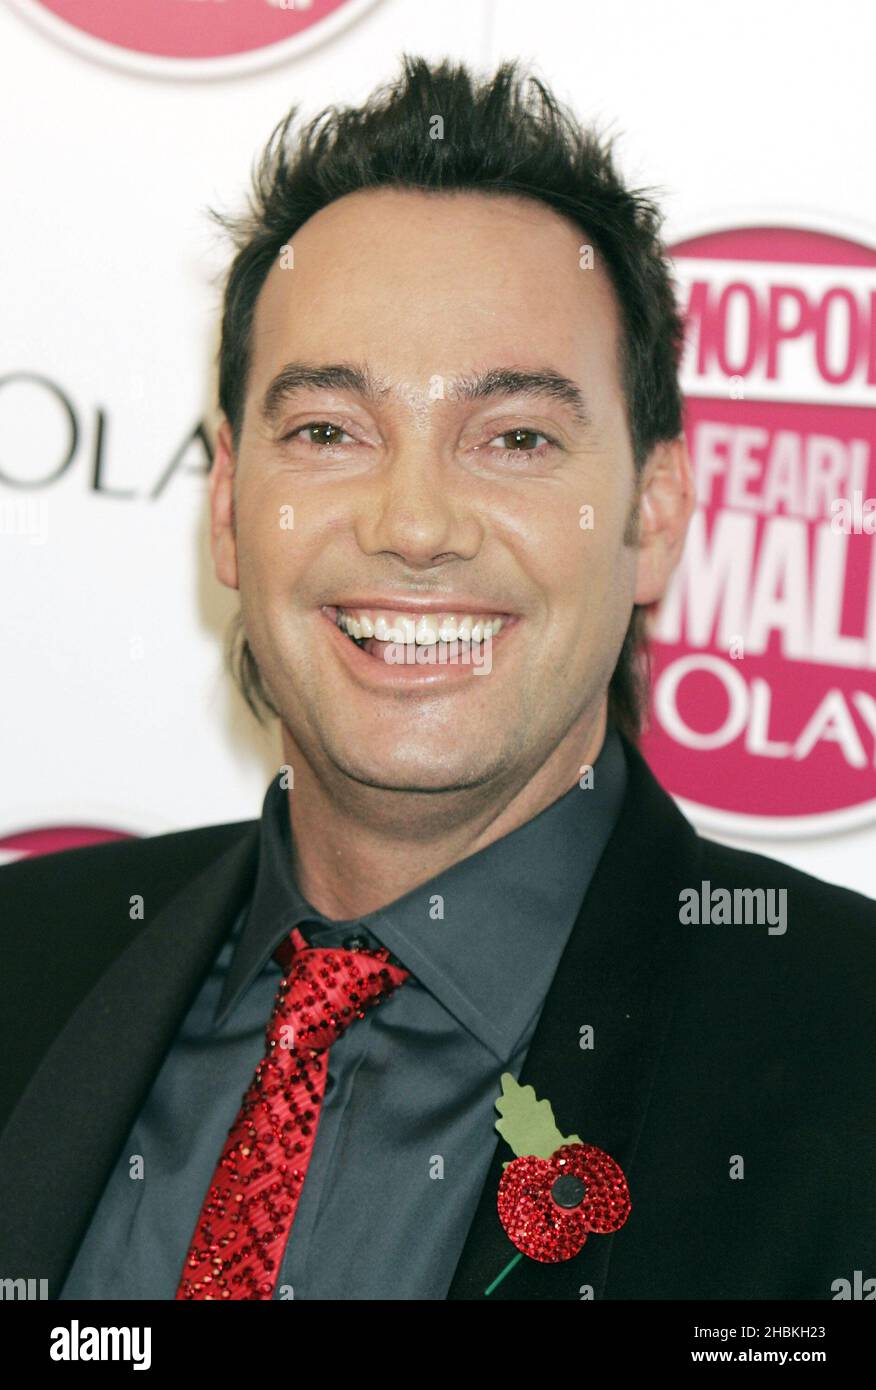 Craig Revel Horwood arriva per i Cosmopolitan Ultimate Women of the Year Awards 2008 presso Banqueting House, Whitehall Place, Londra. Foto Stock